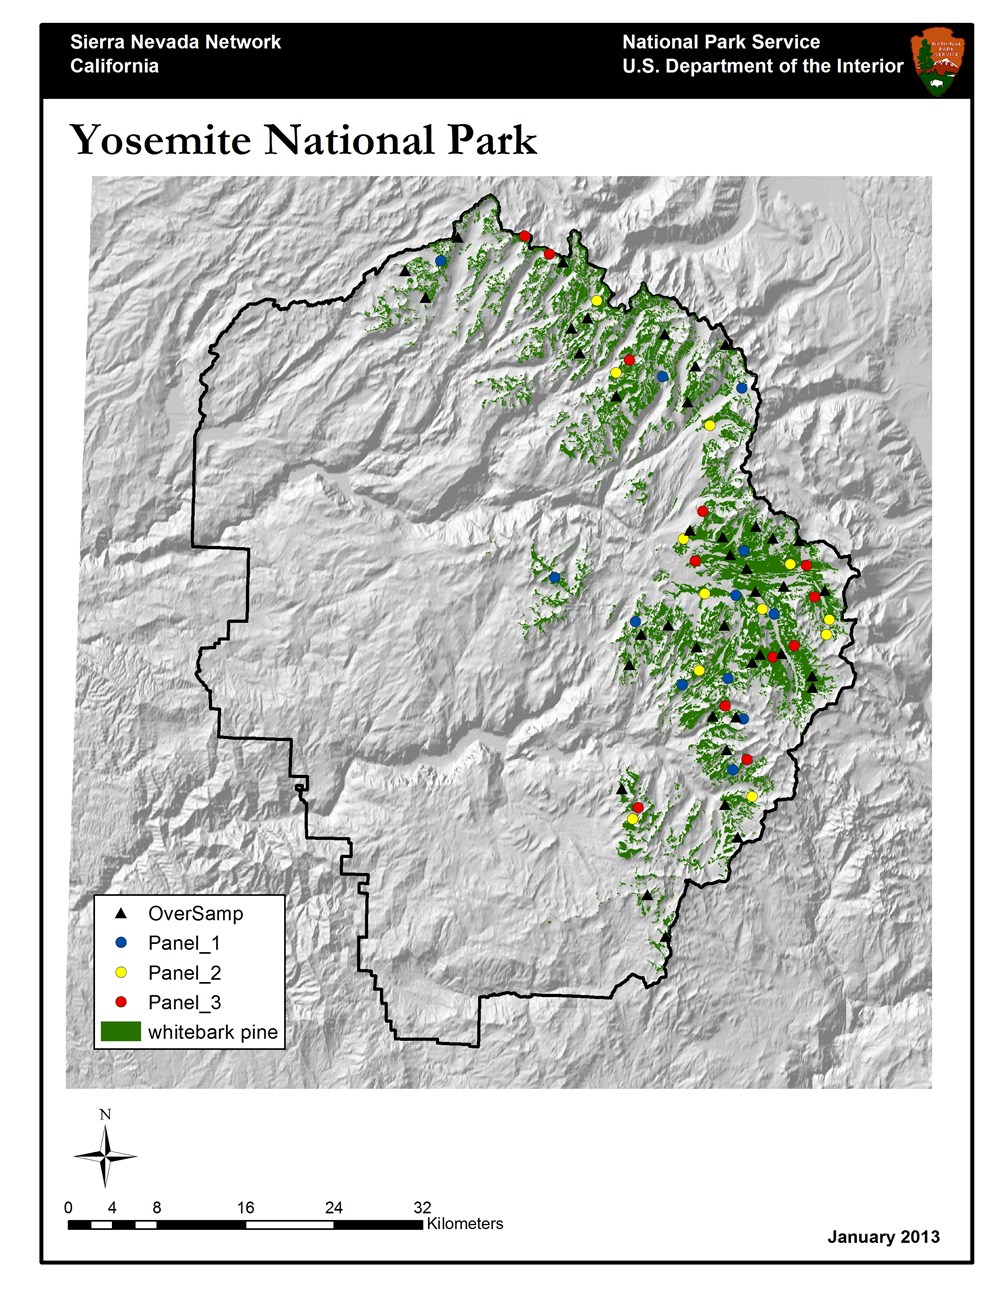 Map shows the distribution of whitebark pine in Yosemite National Park, primarily on the eastern, high-elevation areas, and shows the location of monitoring plots.